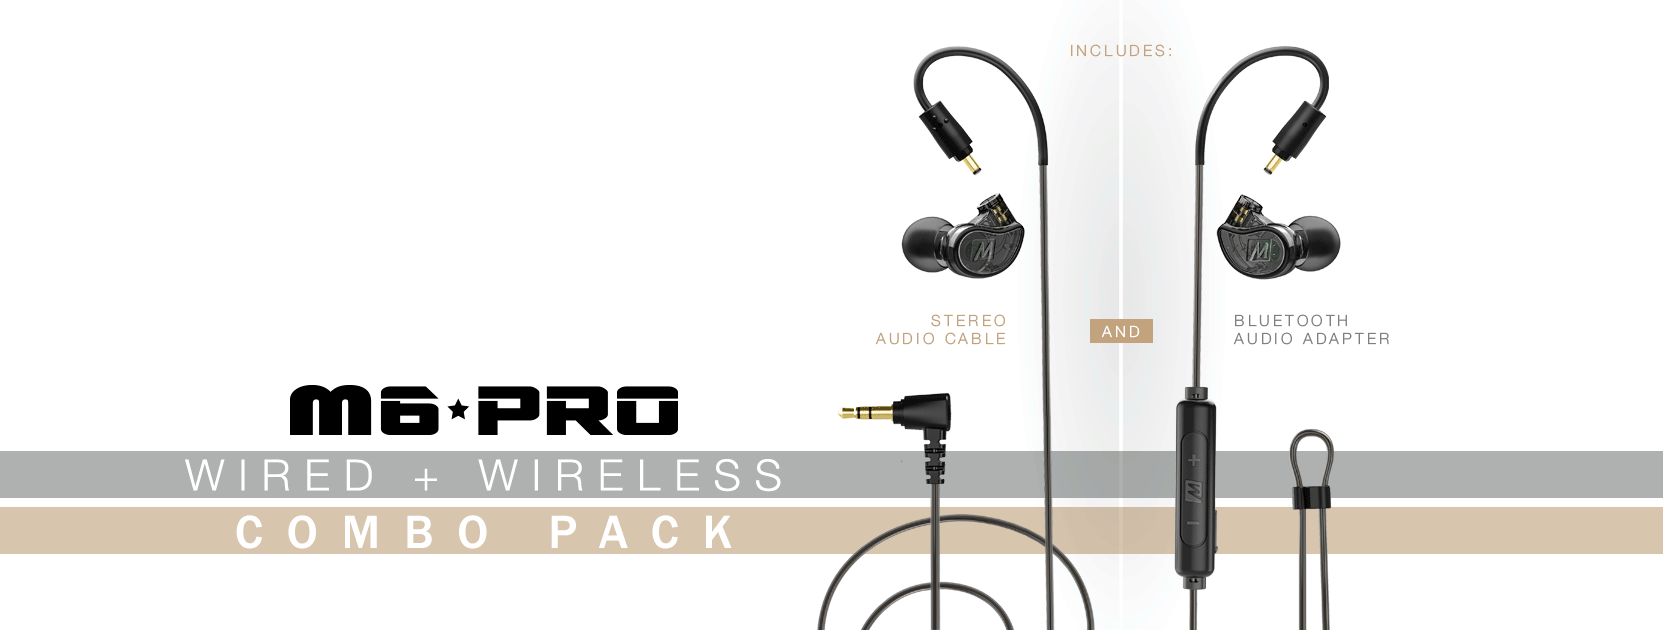 MEE audio M6 PRO Musicians' in-Ear Monitors Wired + Wireless Combo Pack:  Includes Stereo Audio Cable and Bluetooth Audio Adapter (Clear)